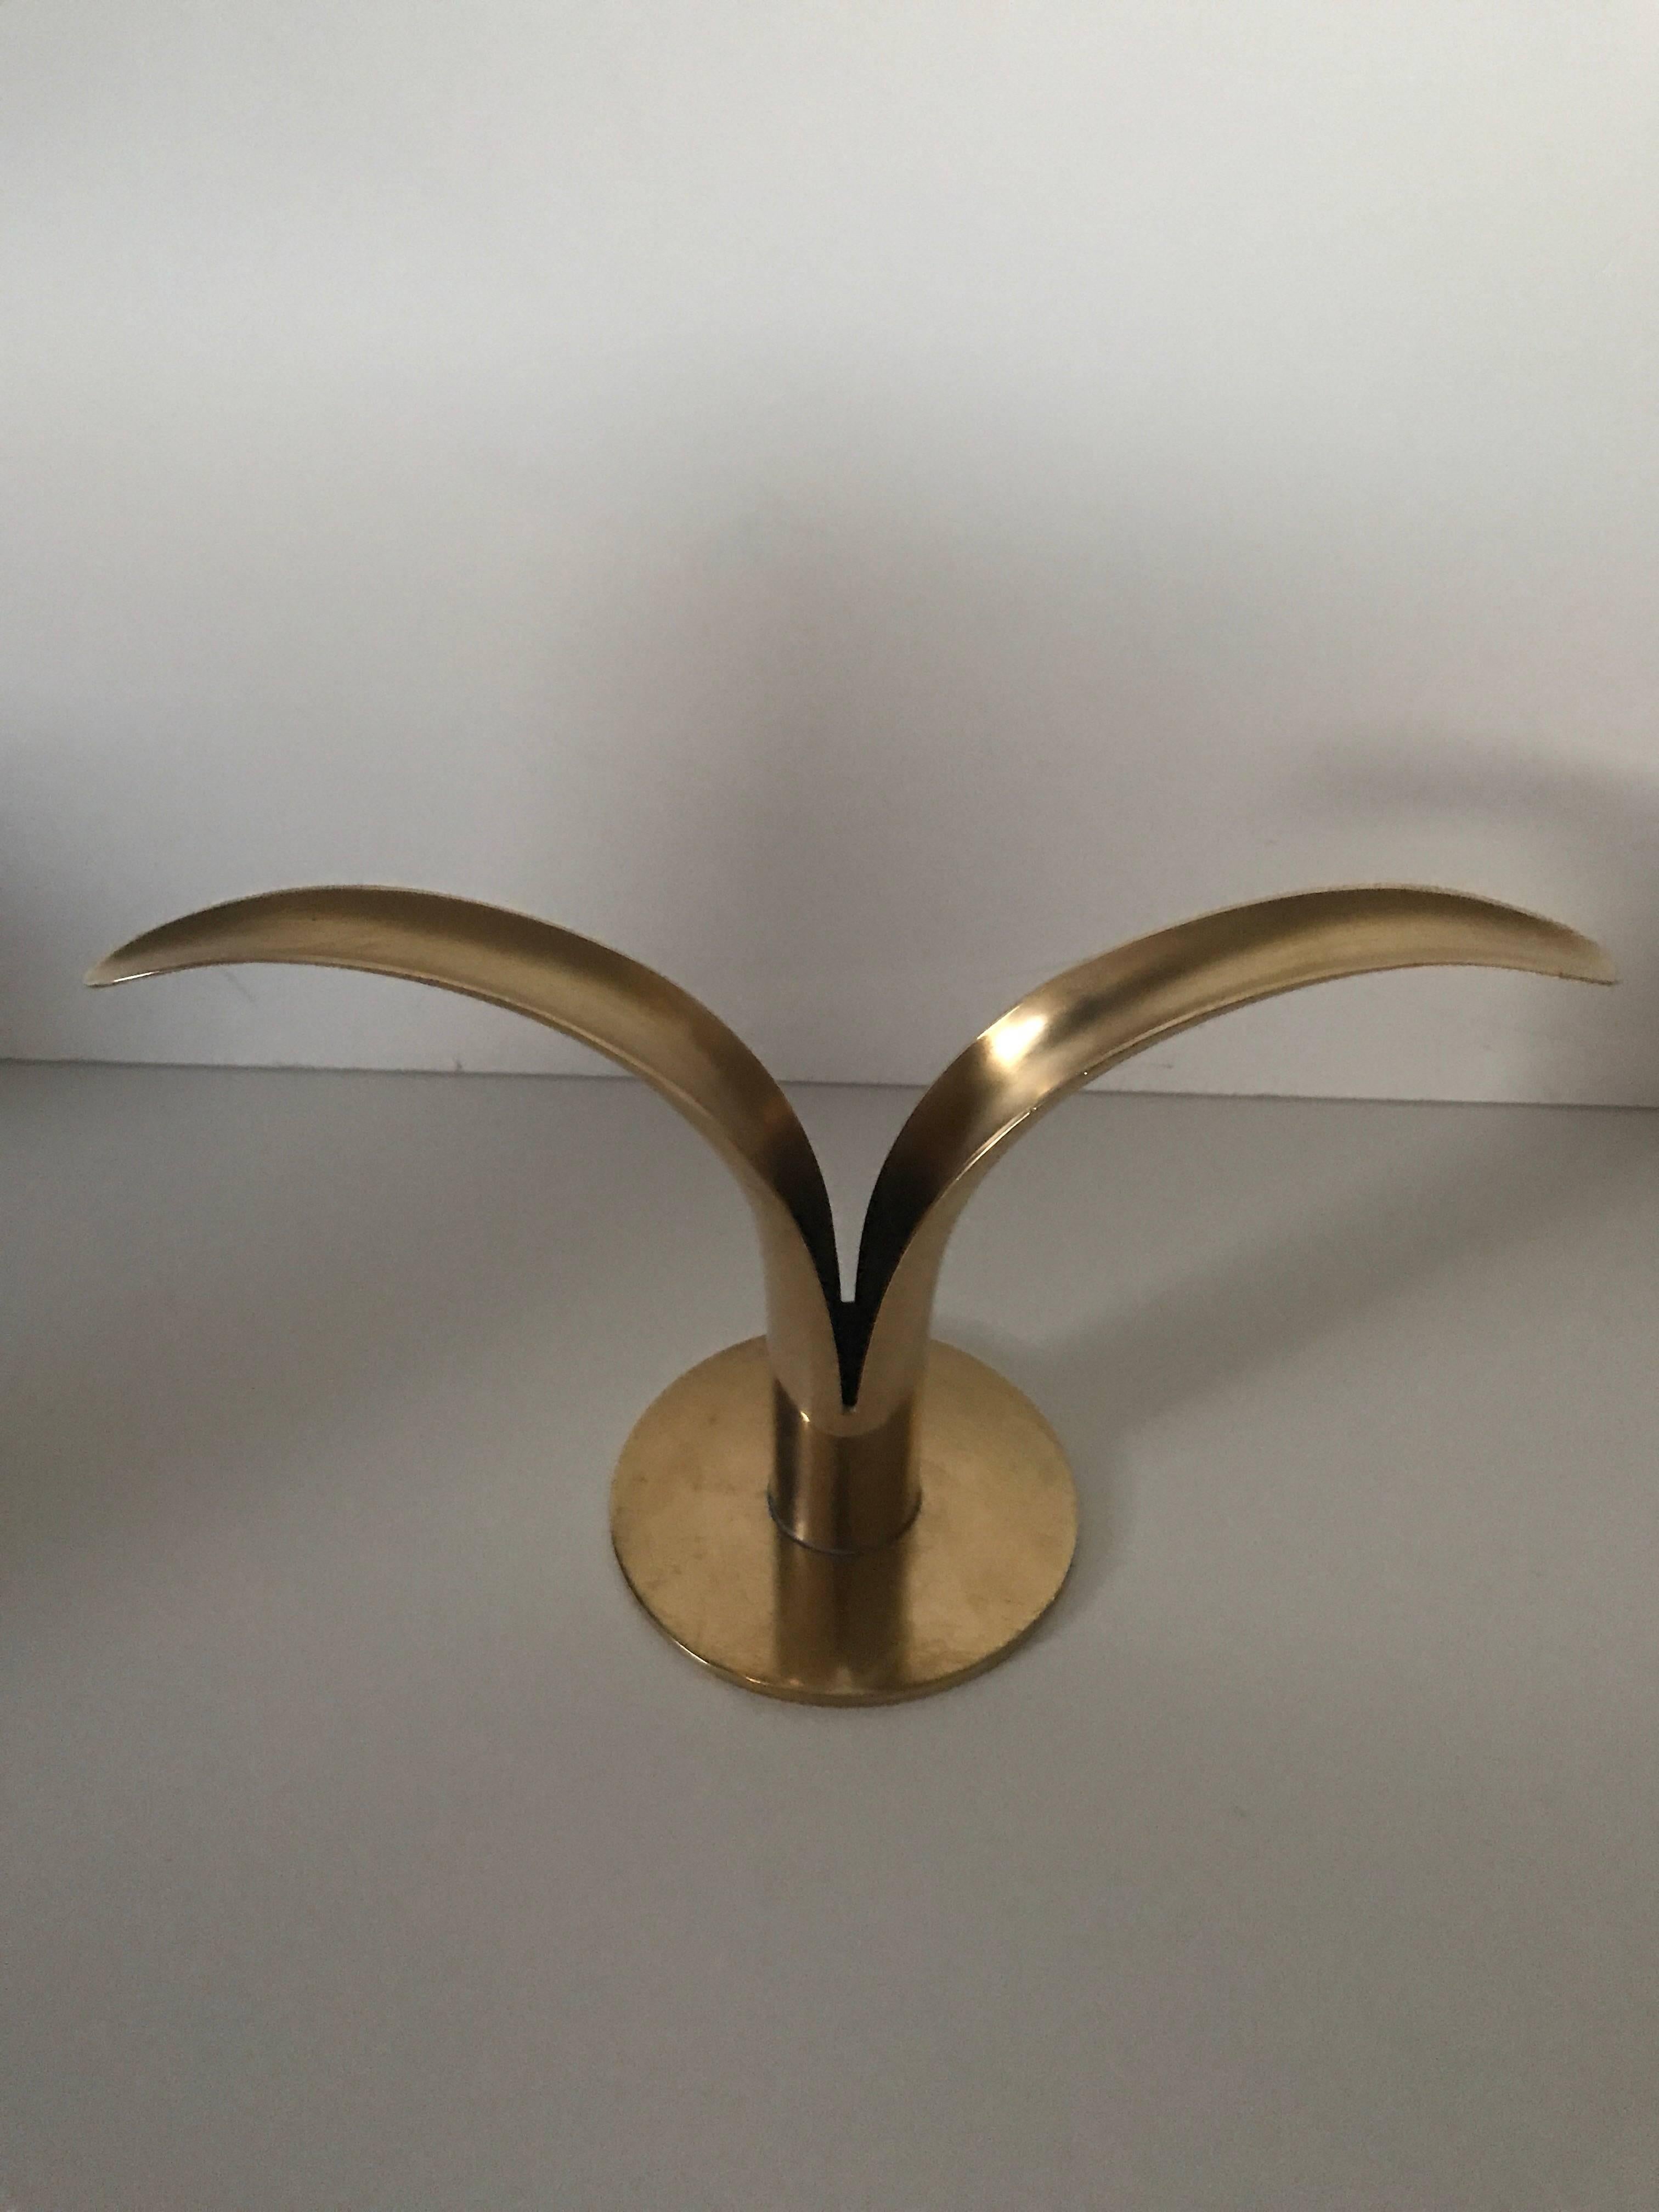 Pair of 1950, Swedish brass candleholders Liljan by Ivar Ålenius Björk at Ystad Metal. There are two pair available and the price is for the pair.
They measure 21 cm wide, 12 cm high and 8cm in diameter to the base.


